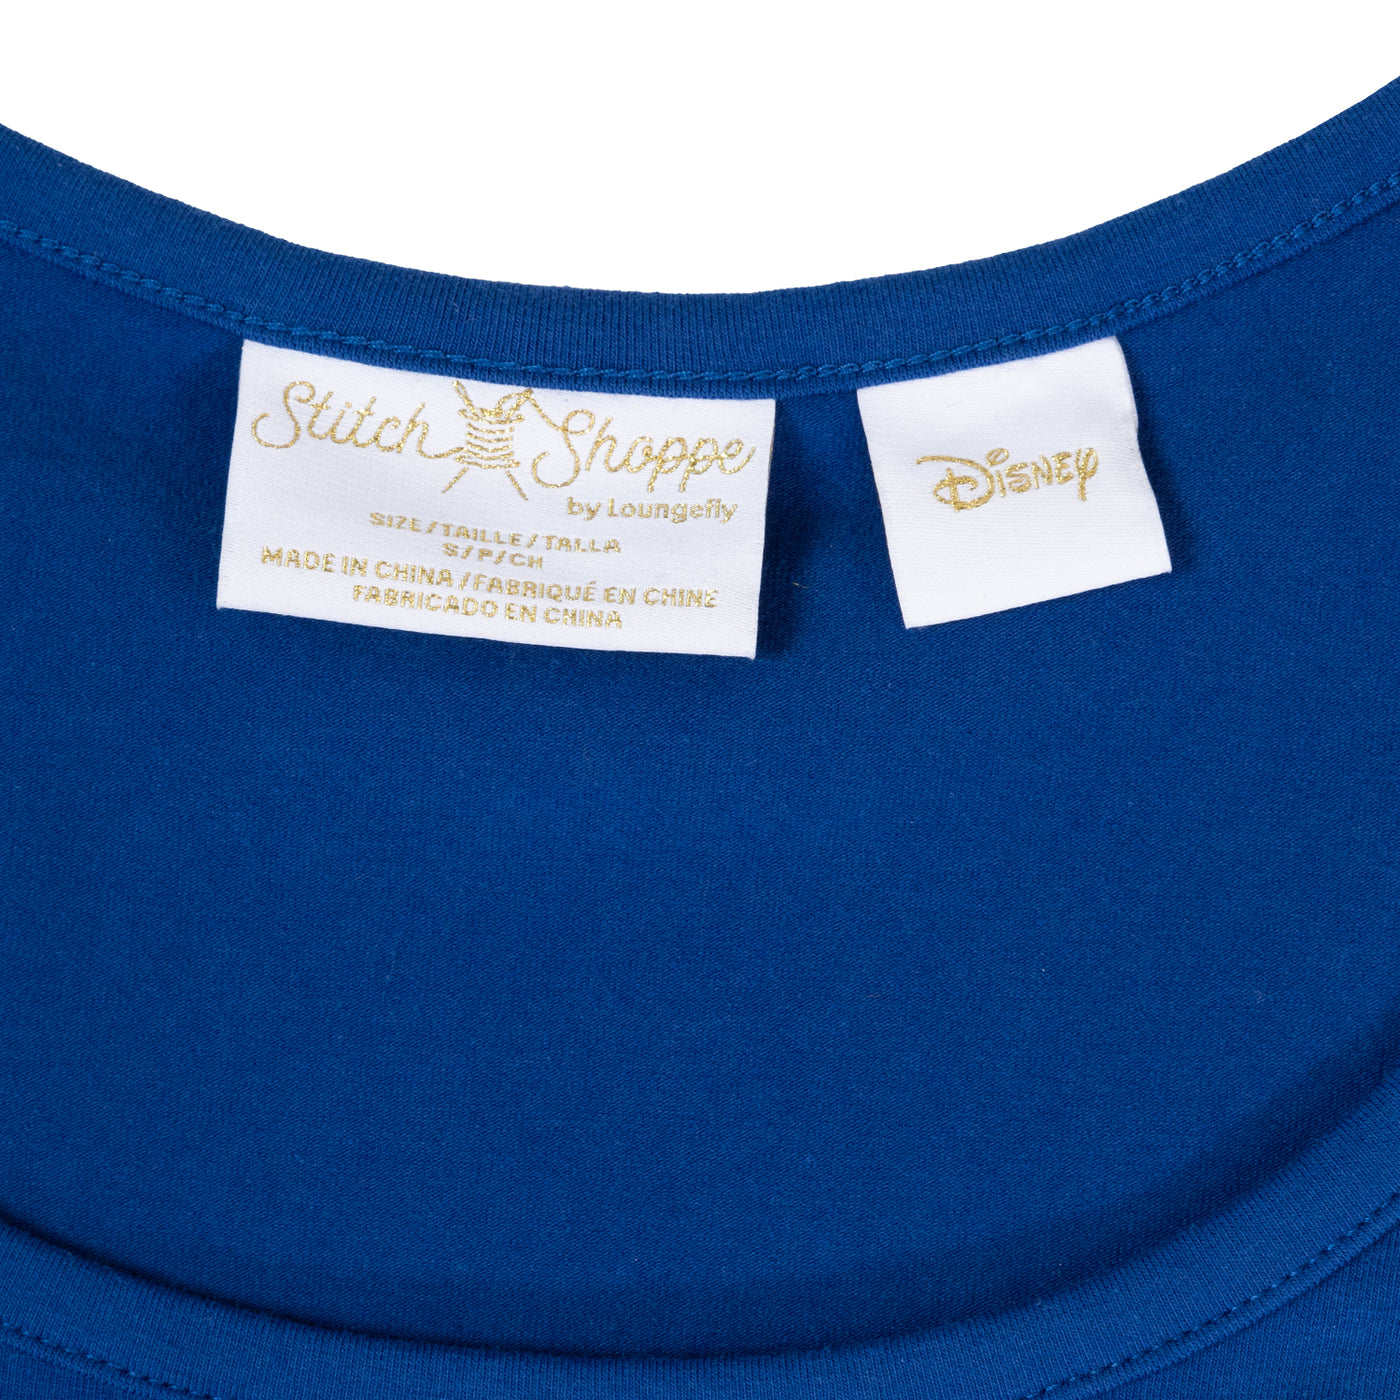 Stitch Shoppe by Loungefly Disney Peter Pan Tinkerbell "Kelly" Fashion Top Shirt